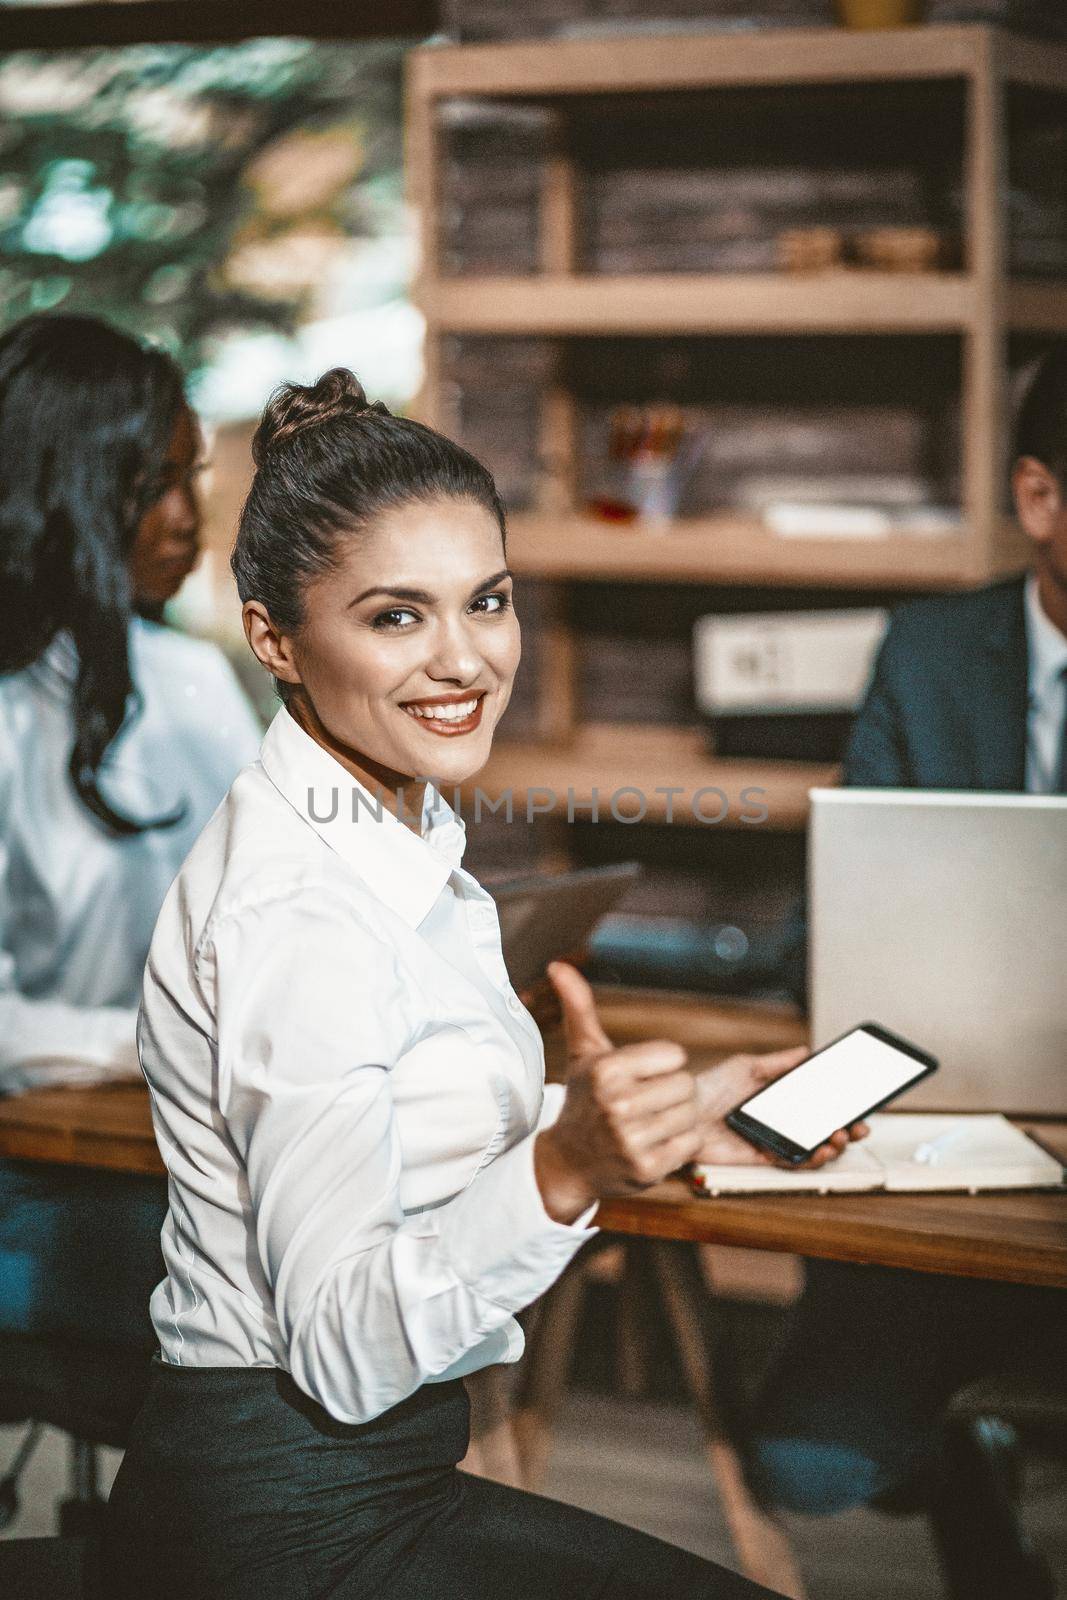 Charming Office Worker Toothy Smiles Looking At Camera, Young Business Woman In White Blouse Shows Thumb With One Hand And Holds Smart Phone With A White Screen In Other Hand, Toned Image